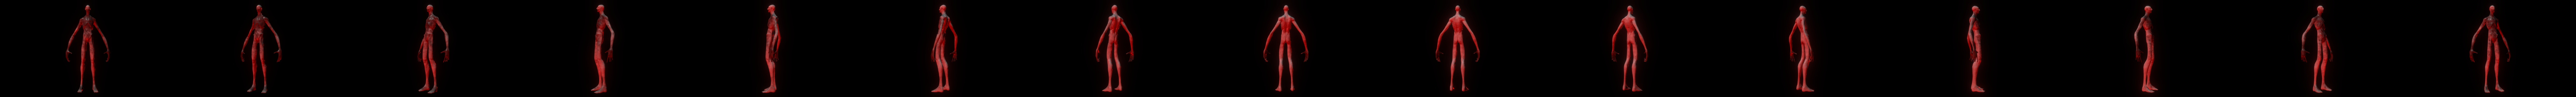 SCP: Unity  SCP-939 - Download Free 3D model by ThatJamGuy (@ThatJamGuy)  [62aebee]